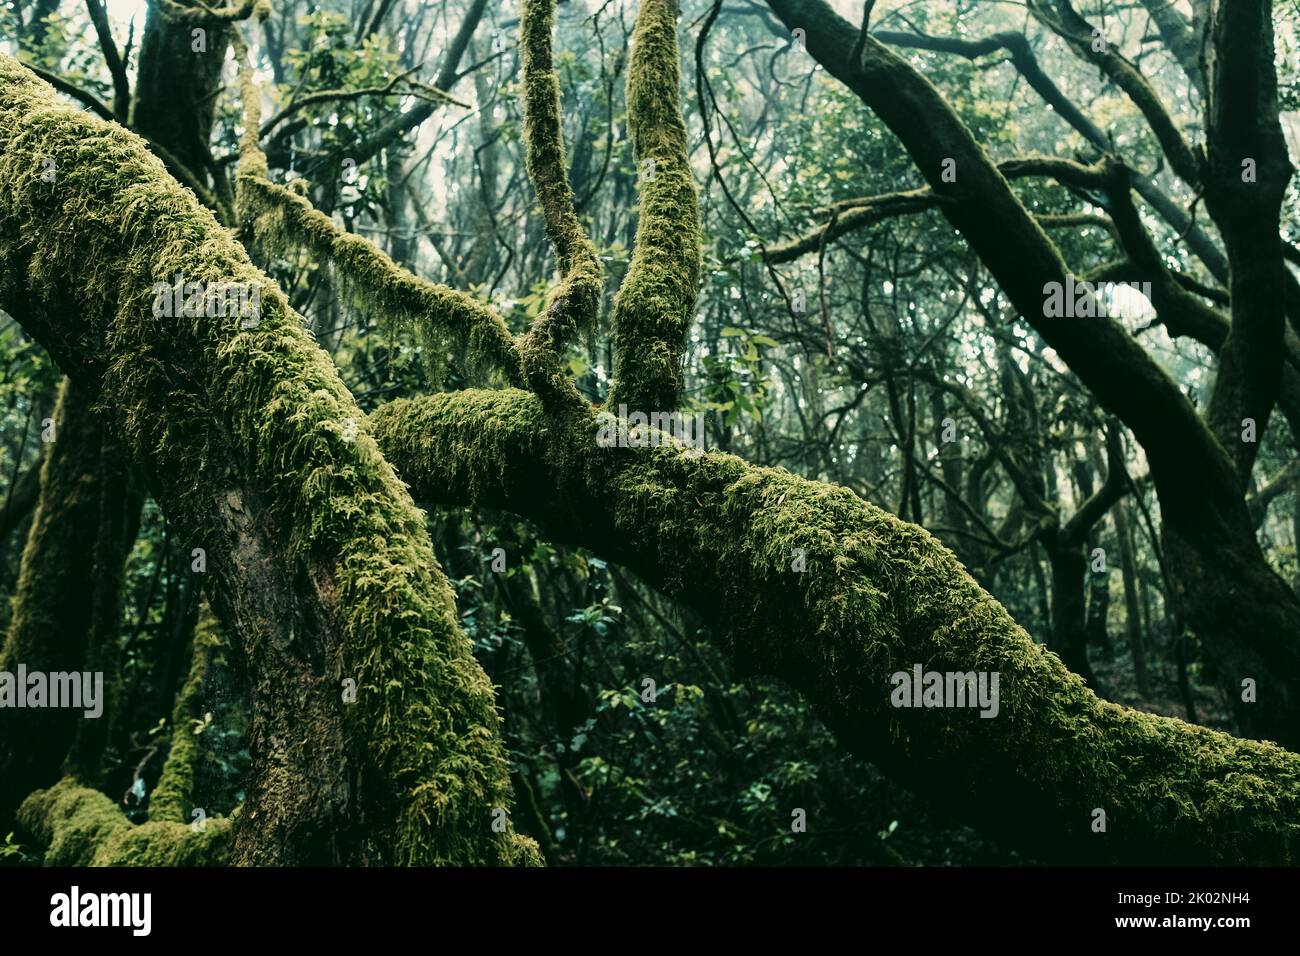 Close up of green trunk trees with musk in a deep wild forest background. Scenic nature outdoors park landscape. Adventure and explore scenery place. Nature and planet earth. Stock Photo